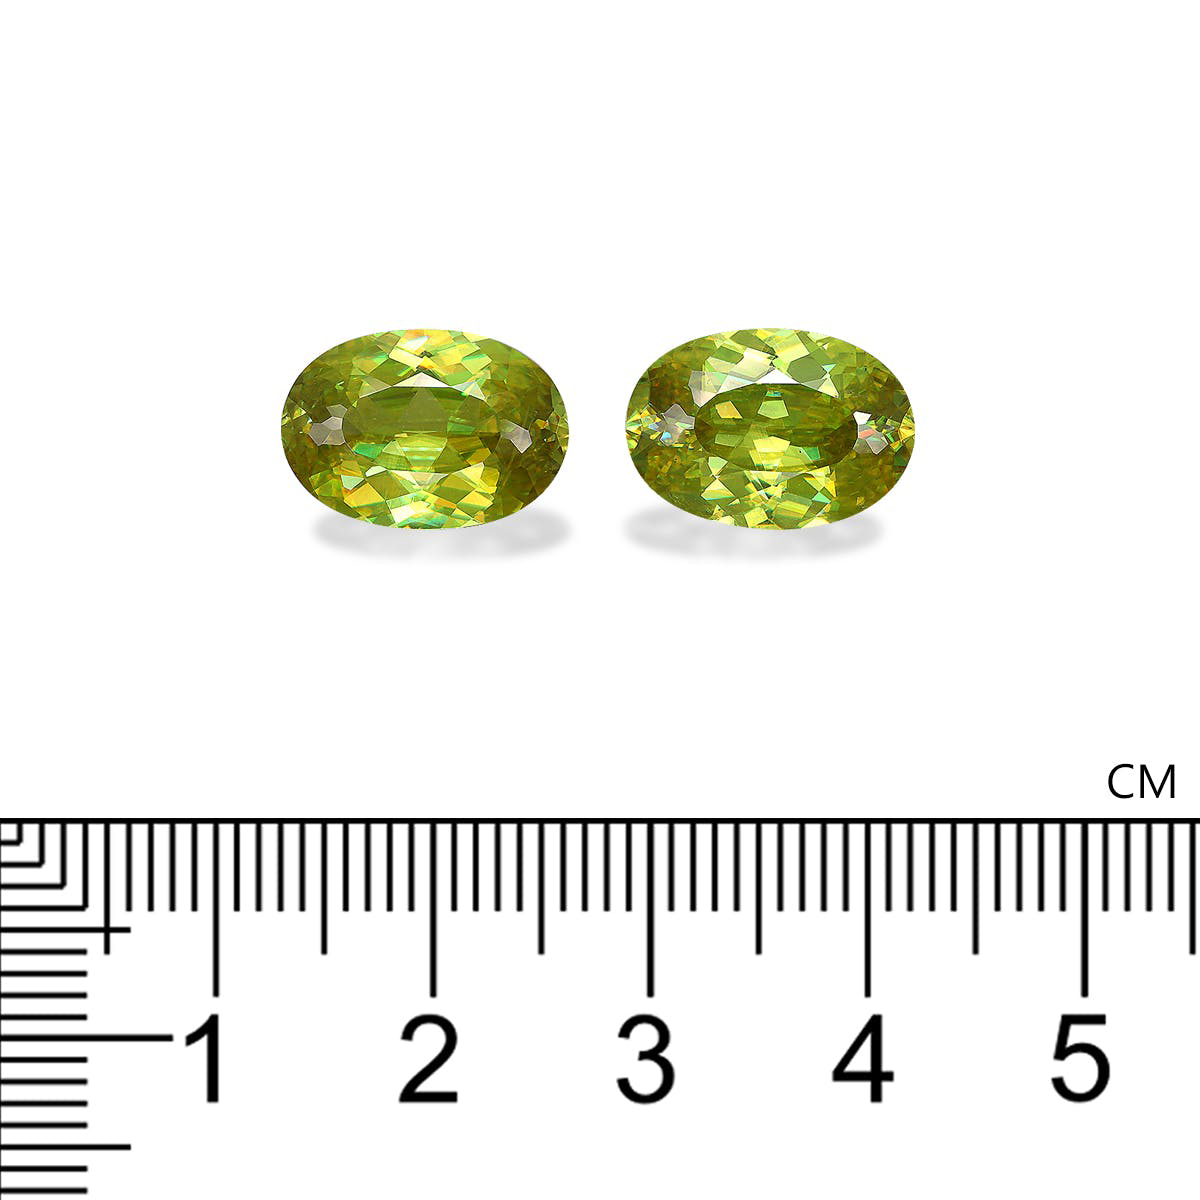 Picture of Lime Green Sphene 9.58ct - Pair (SH1088)